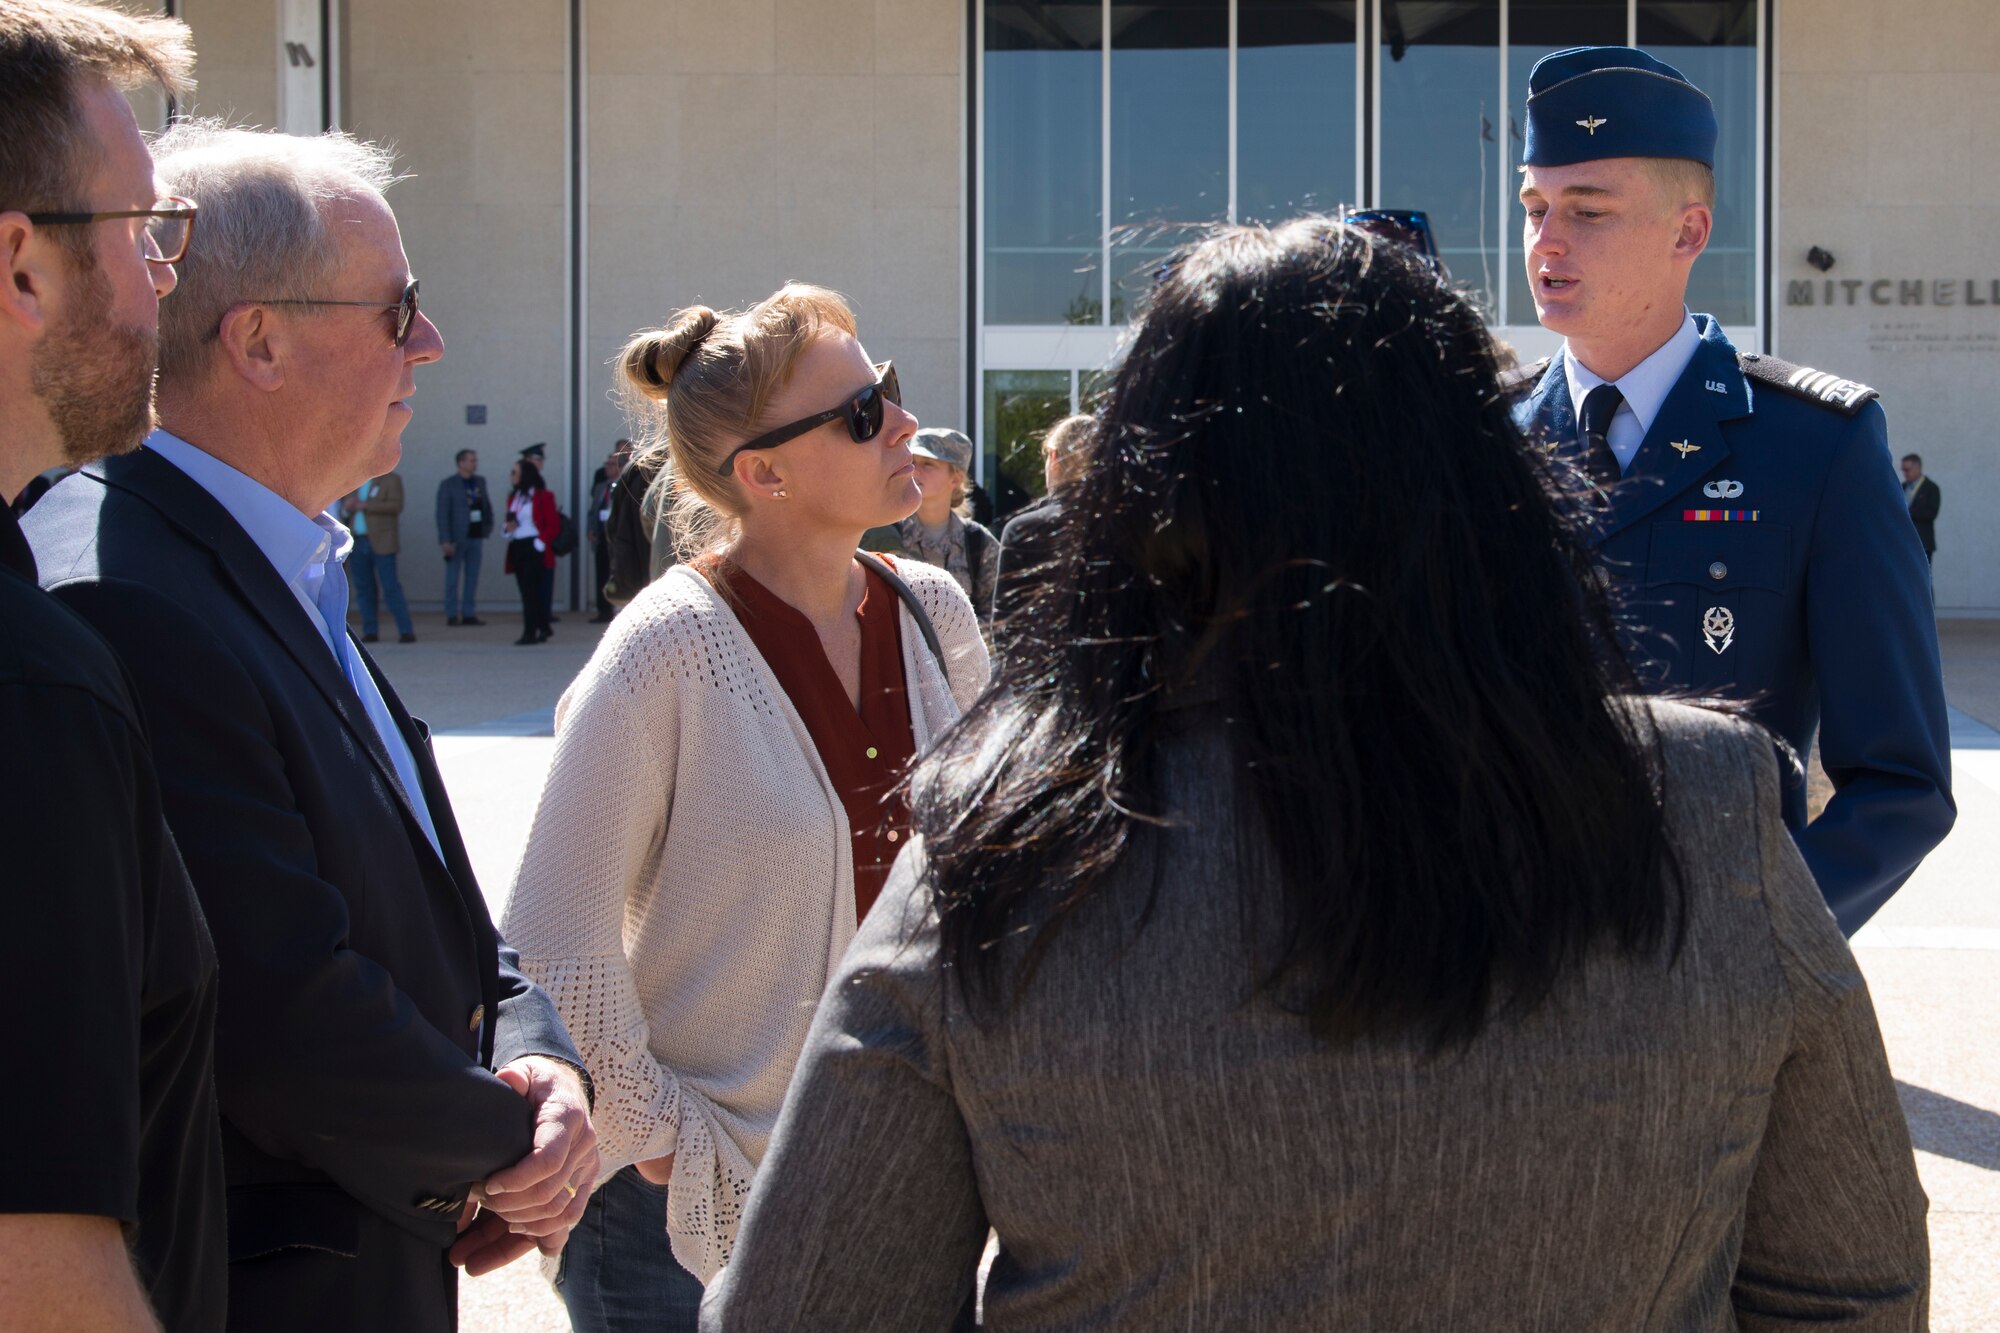 Local community leaders part of the 302nd Airlift Wing’s Partners in Leadership program speak with a cadet during a visit to the U.S. Air Force Academy, Colorado, Sept. 28. The 302nd Airlift Wing, Air Force Reserve-run program took participants to different Air Force organizations throughout 2018 where they learned about how Reserve and active duty units work together. (U.S. Air Force photo by Staff Sgt. Frank Casciotta)